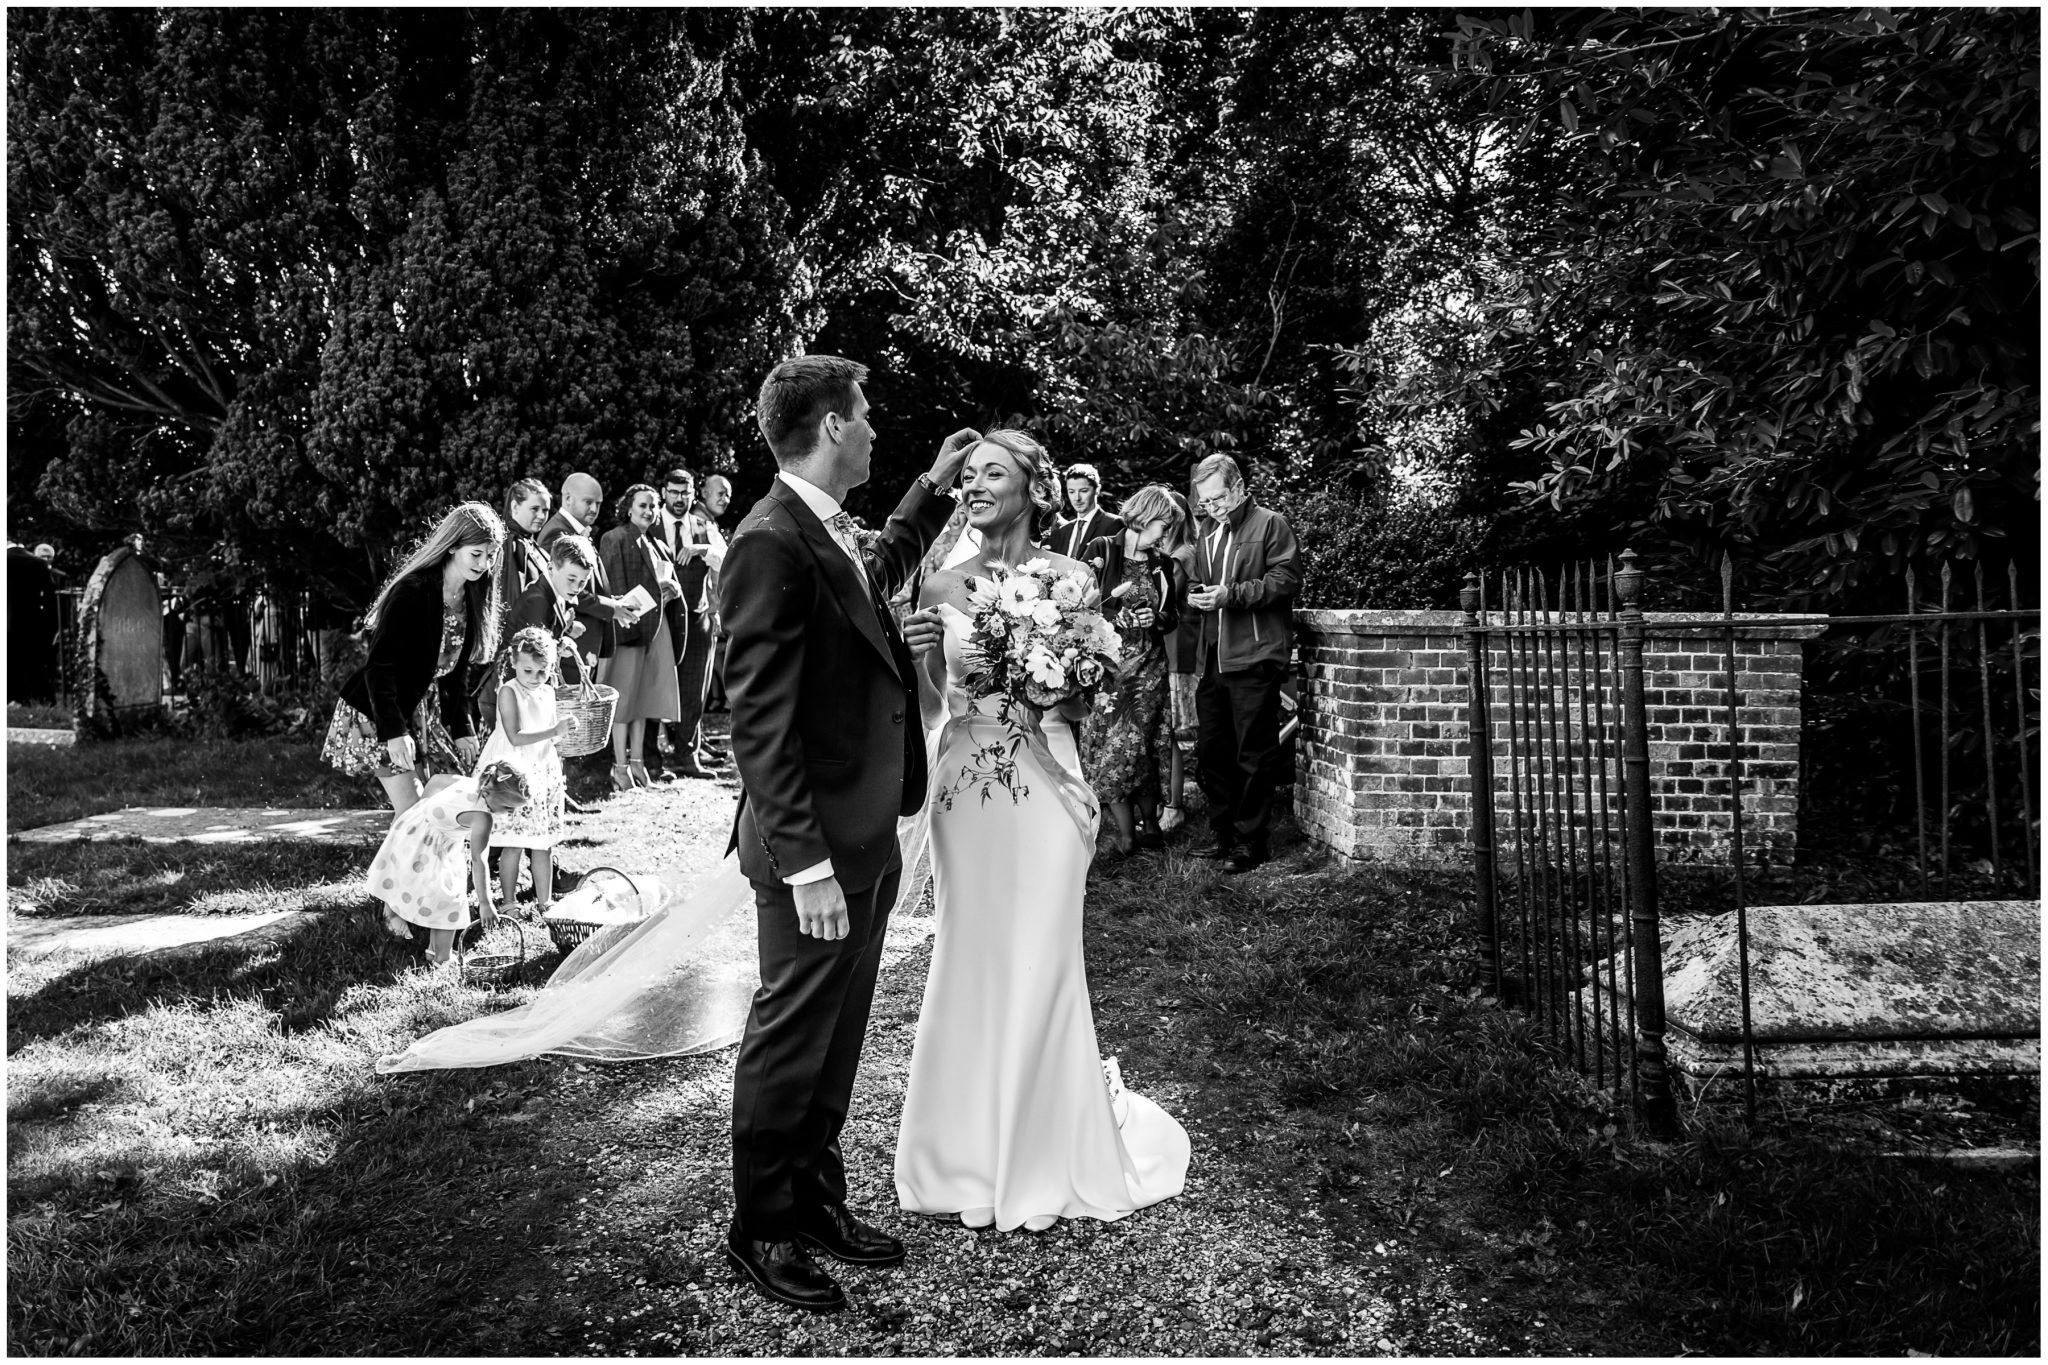 k and white photograph of bride and groom in church grounds immediately after the wedding